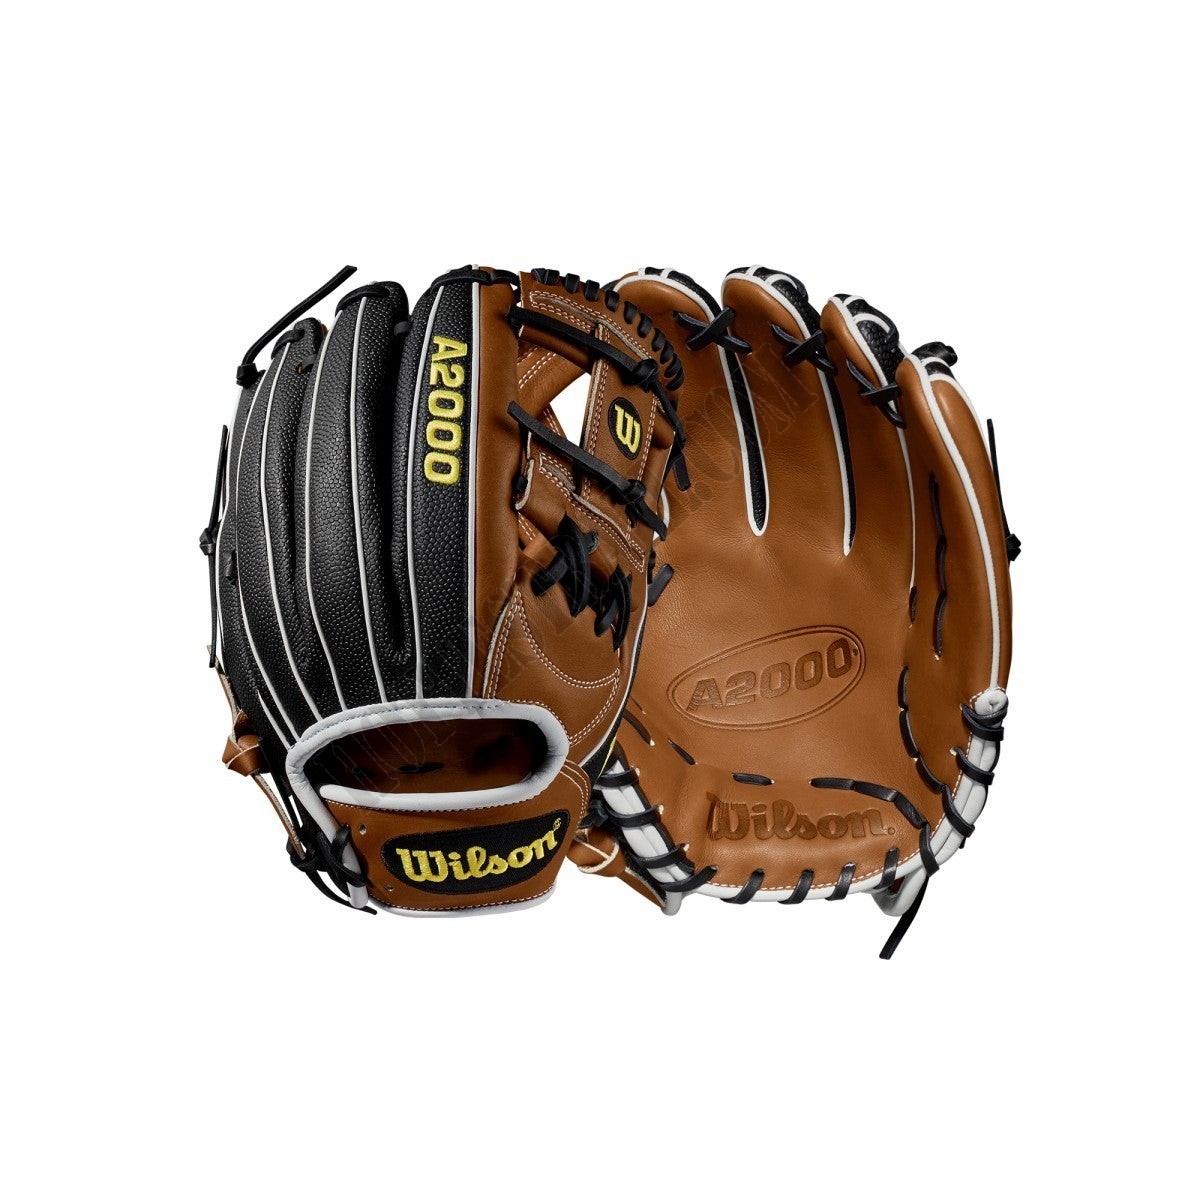 2019 A2000 1787 SuperSkin 11.75" Infield Baseball Glove - Right Hand Throw ● Wilson Promotions - -0